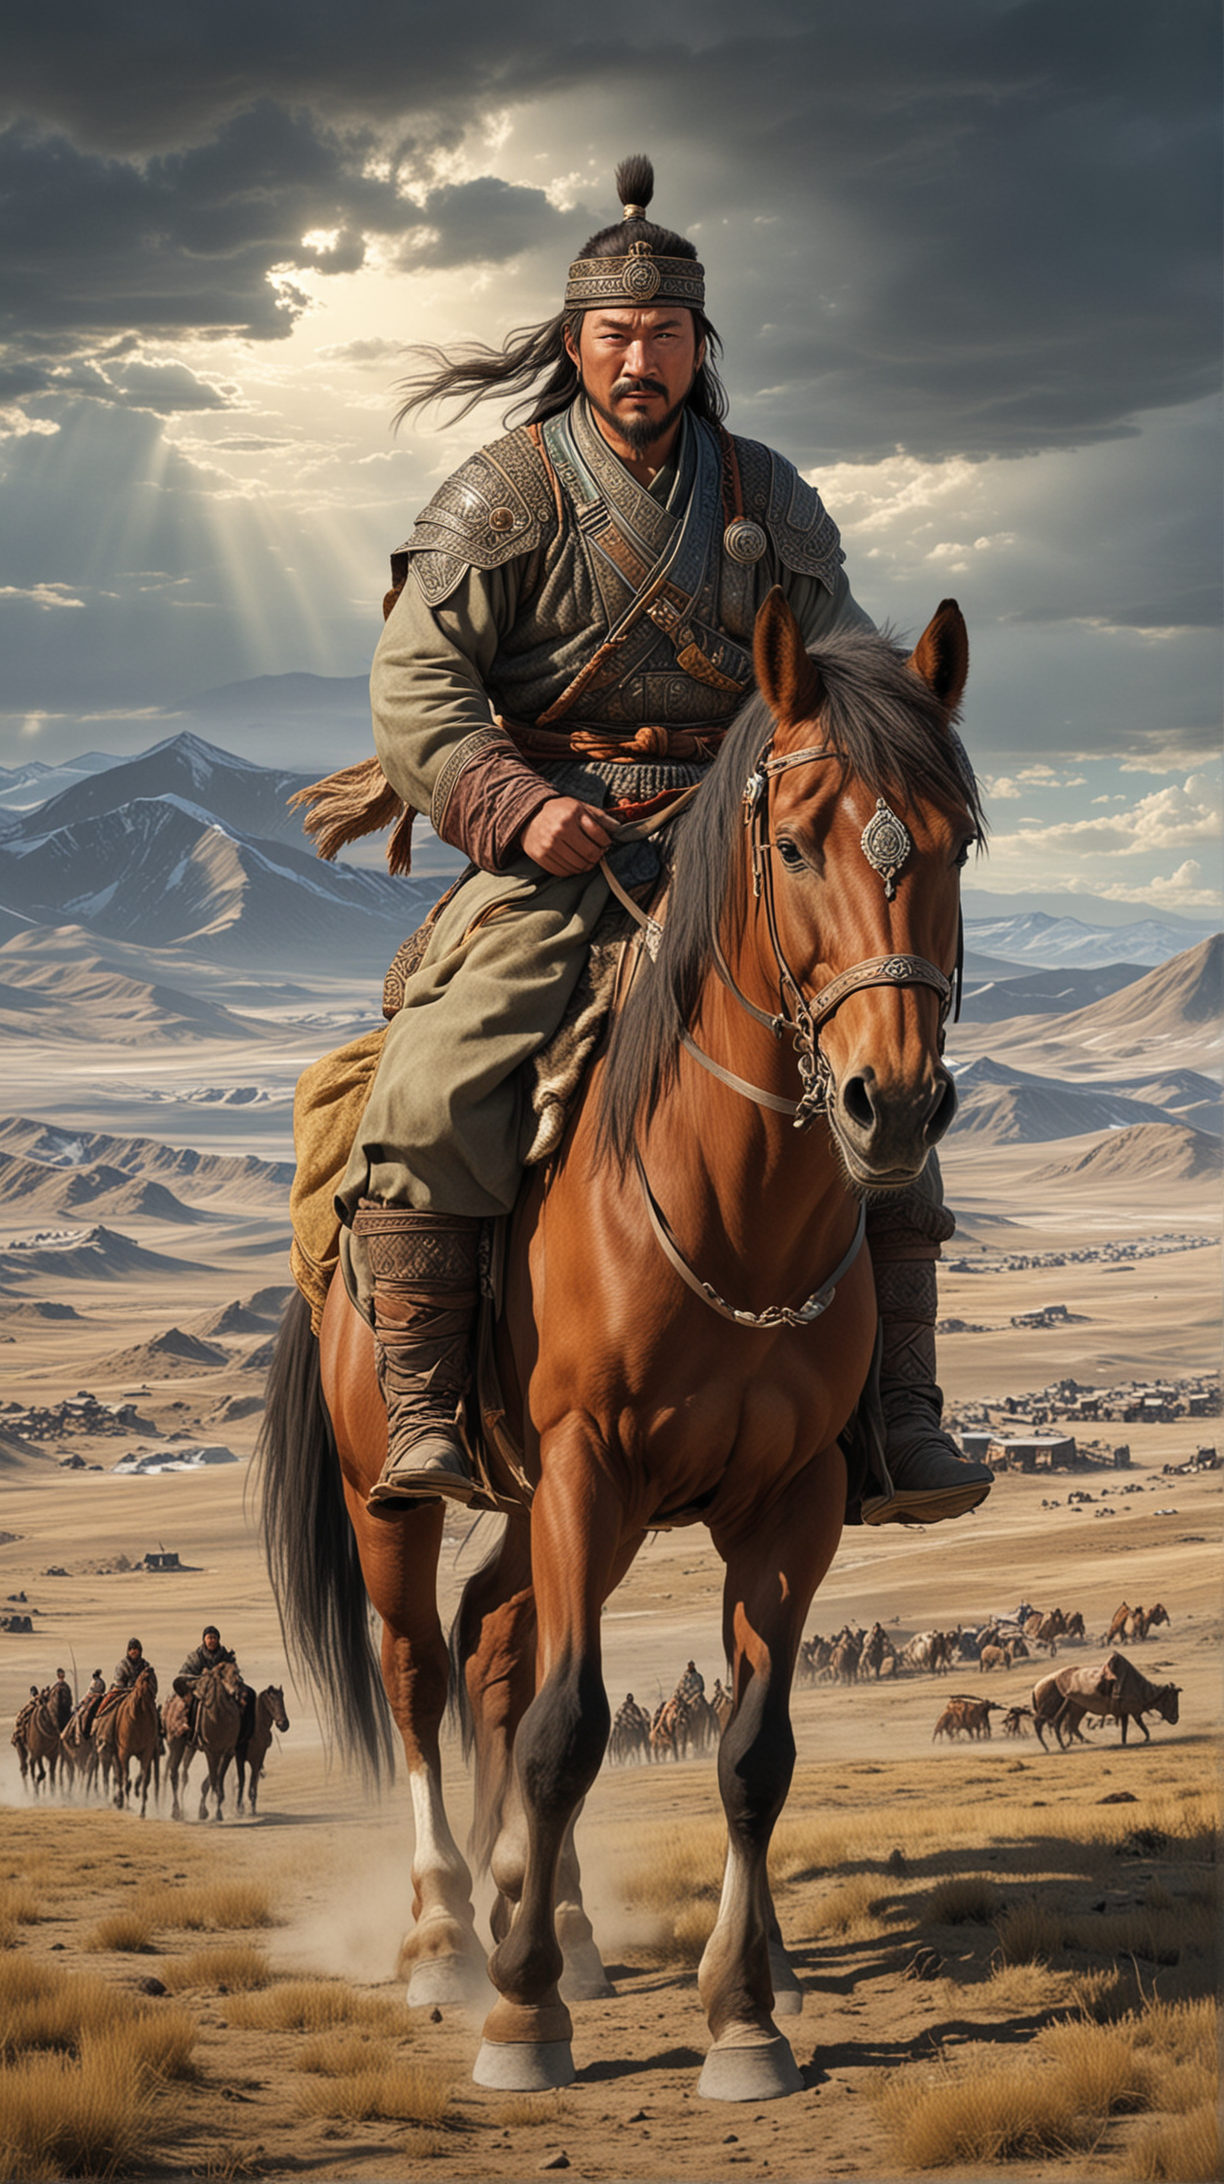  Generate an image depicting Genghis Khan's humble beginnings, growing up amidst the vast Mongolian steppes.